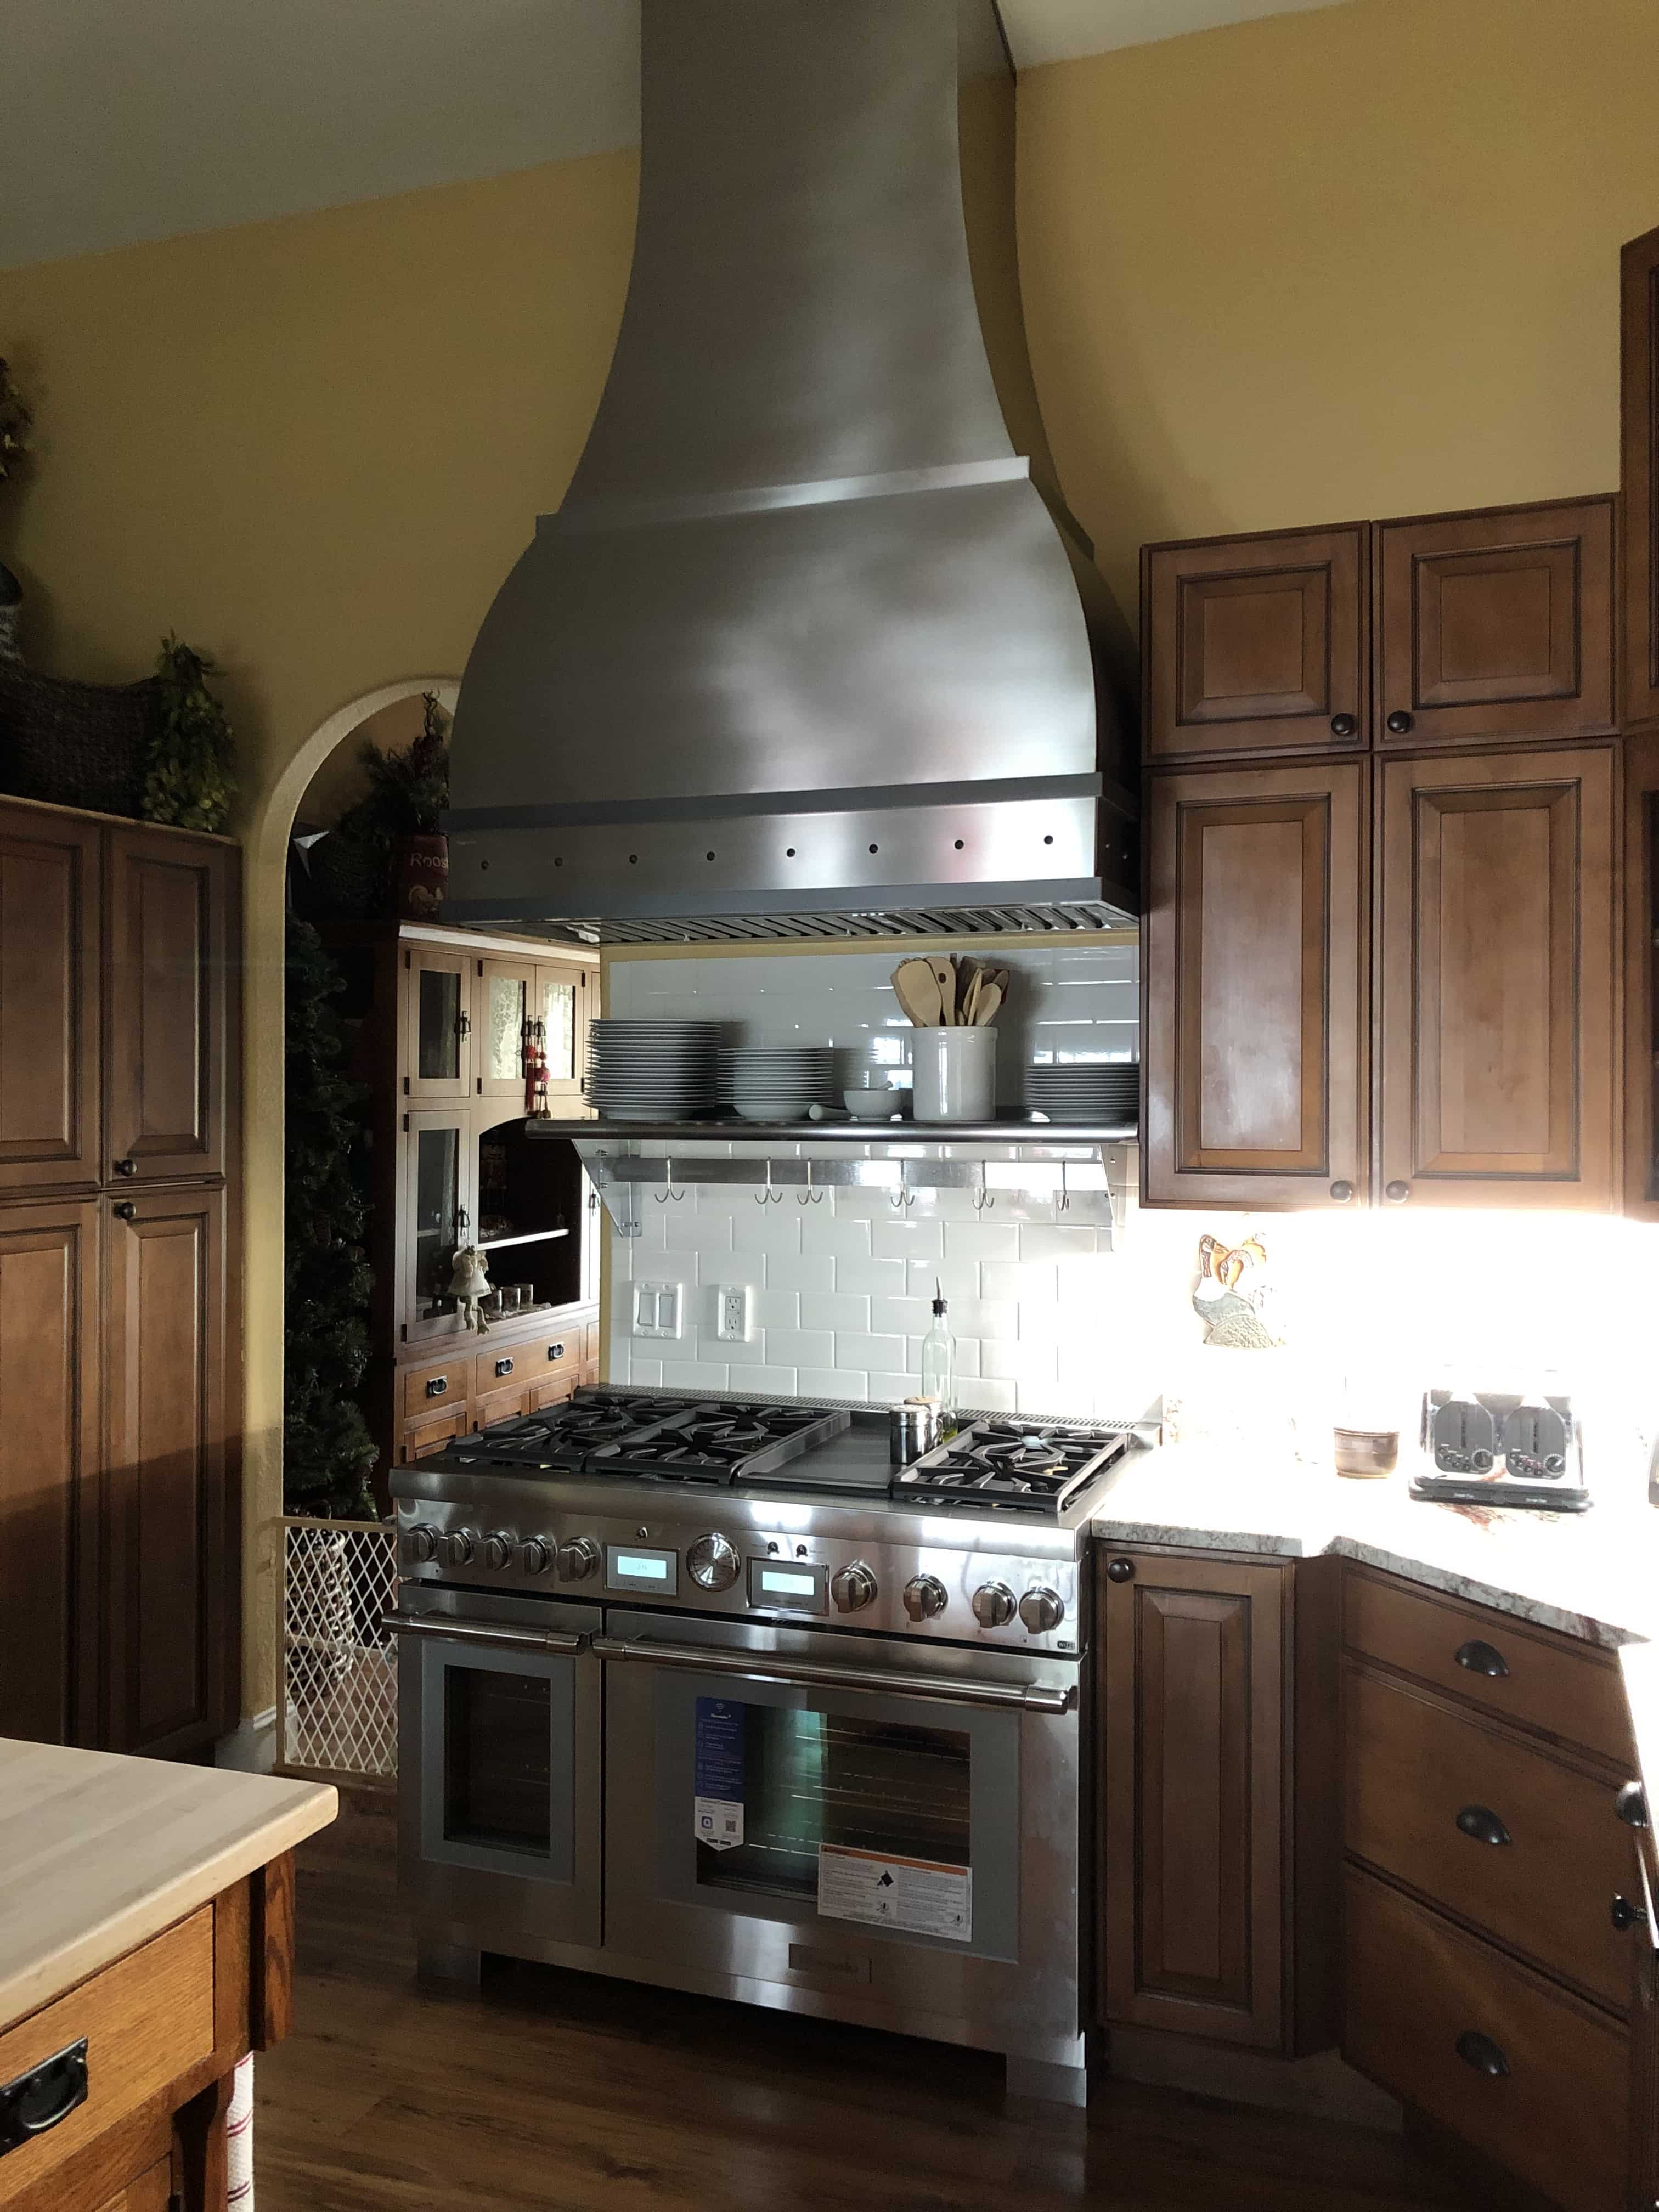 CopperSmith Custom Range Hood Brushed Stainless Steel in a  rustic style kitchen with white tile backsplash white countertops and wood cabinets